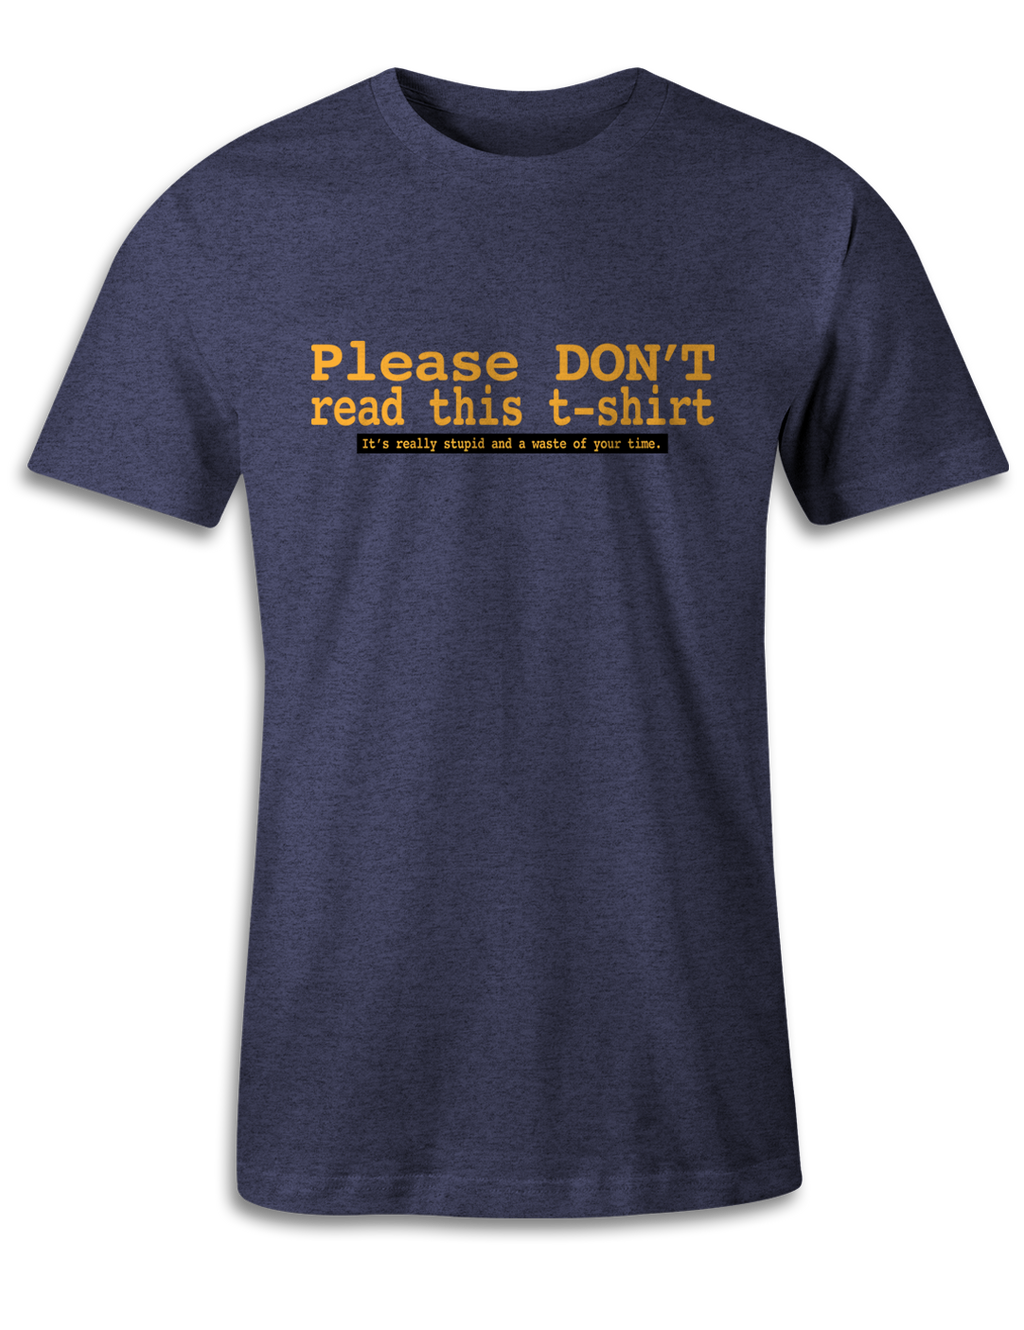 Please Don't Read this t-shirt - Unisex Tee